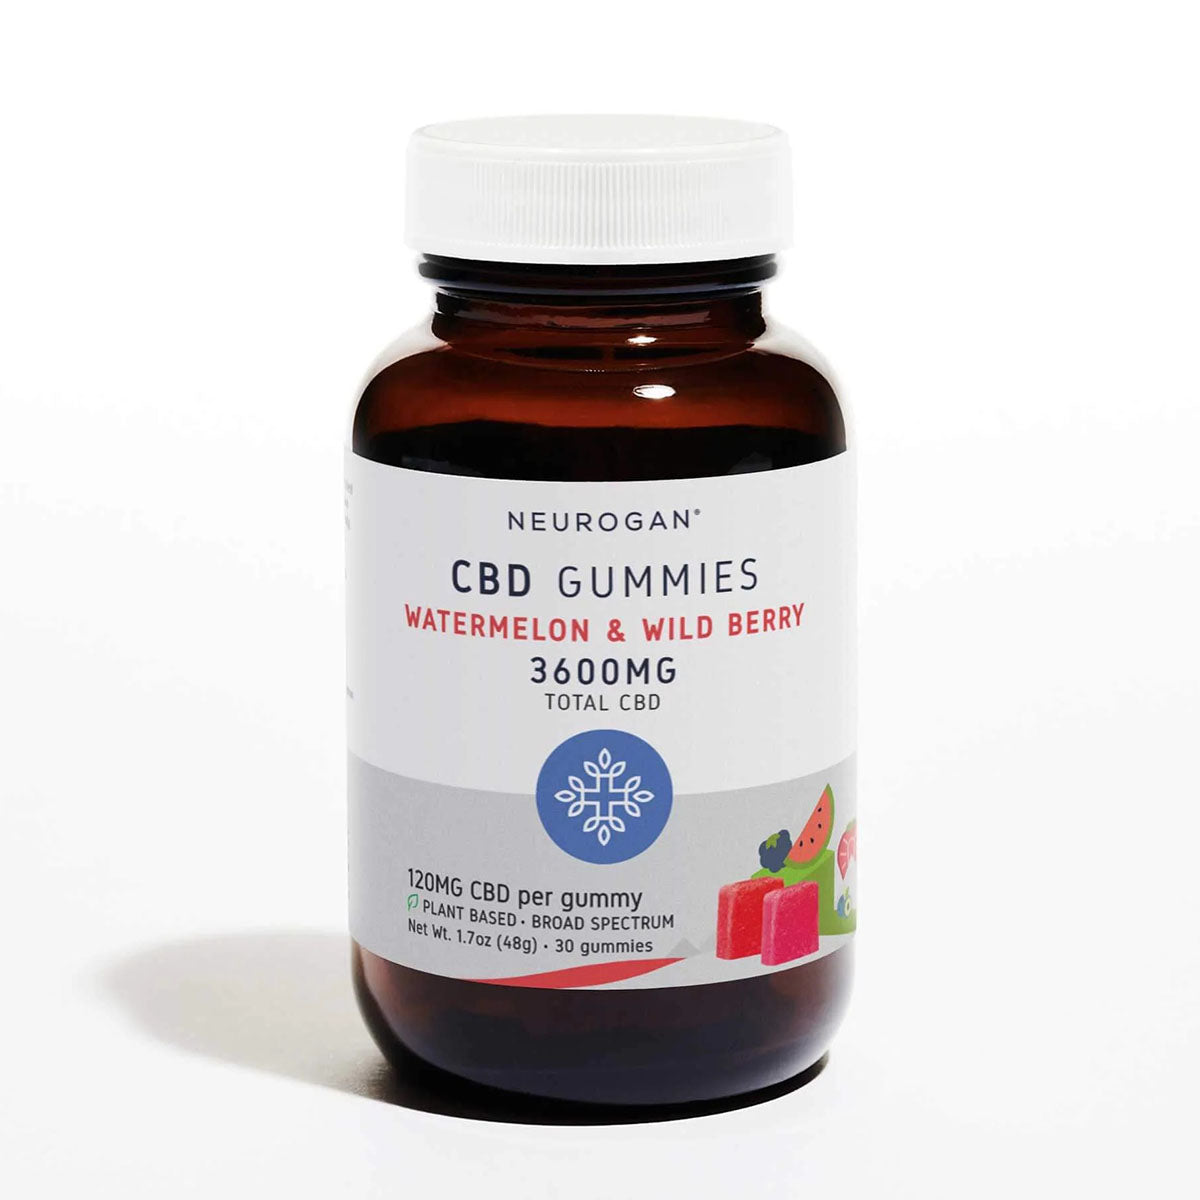 red bottle of Neurogan THC-Free CBD Gummies with white and gray label